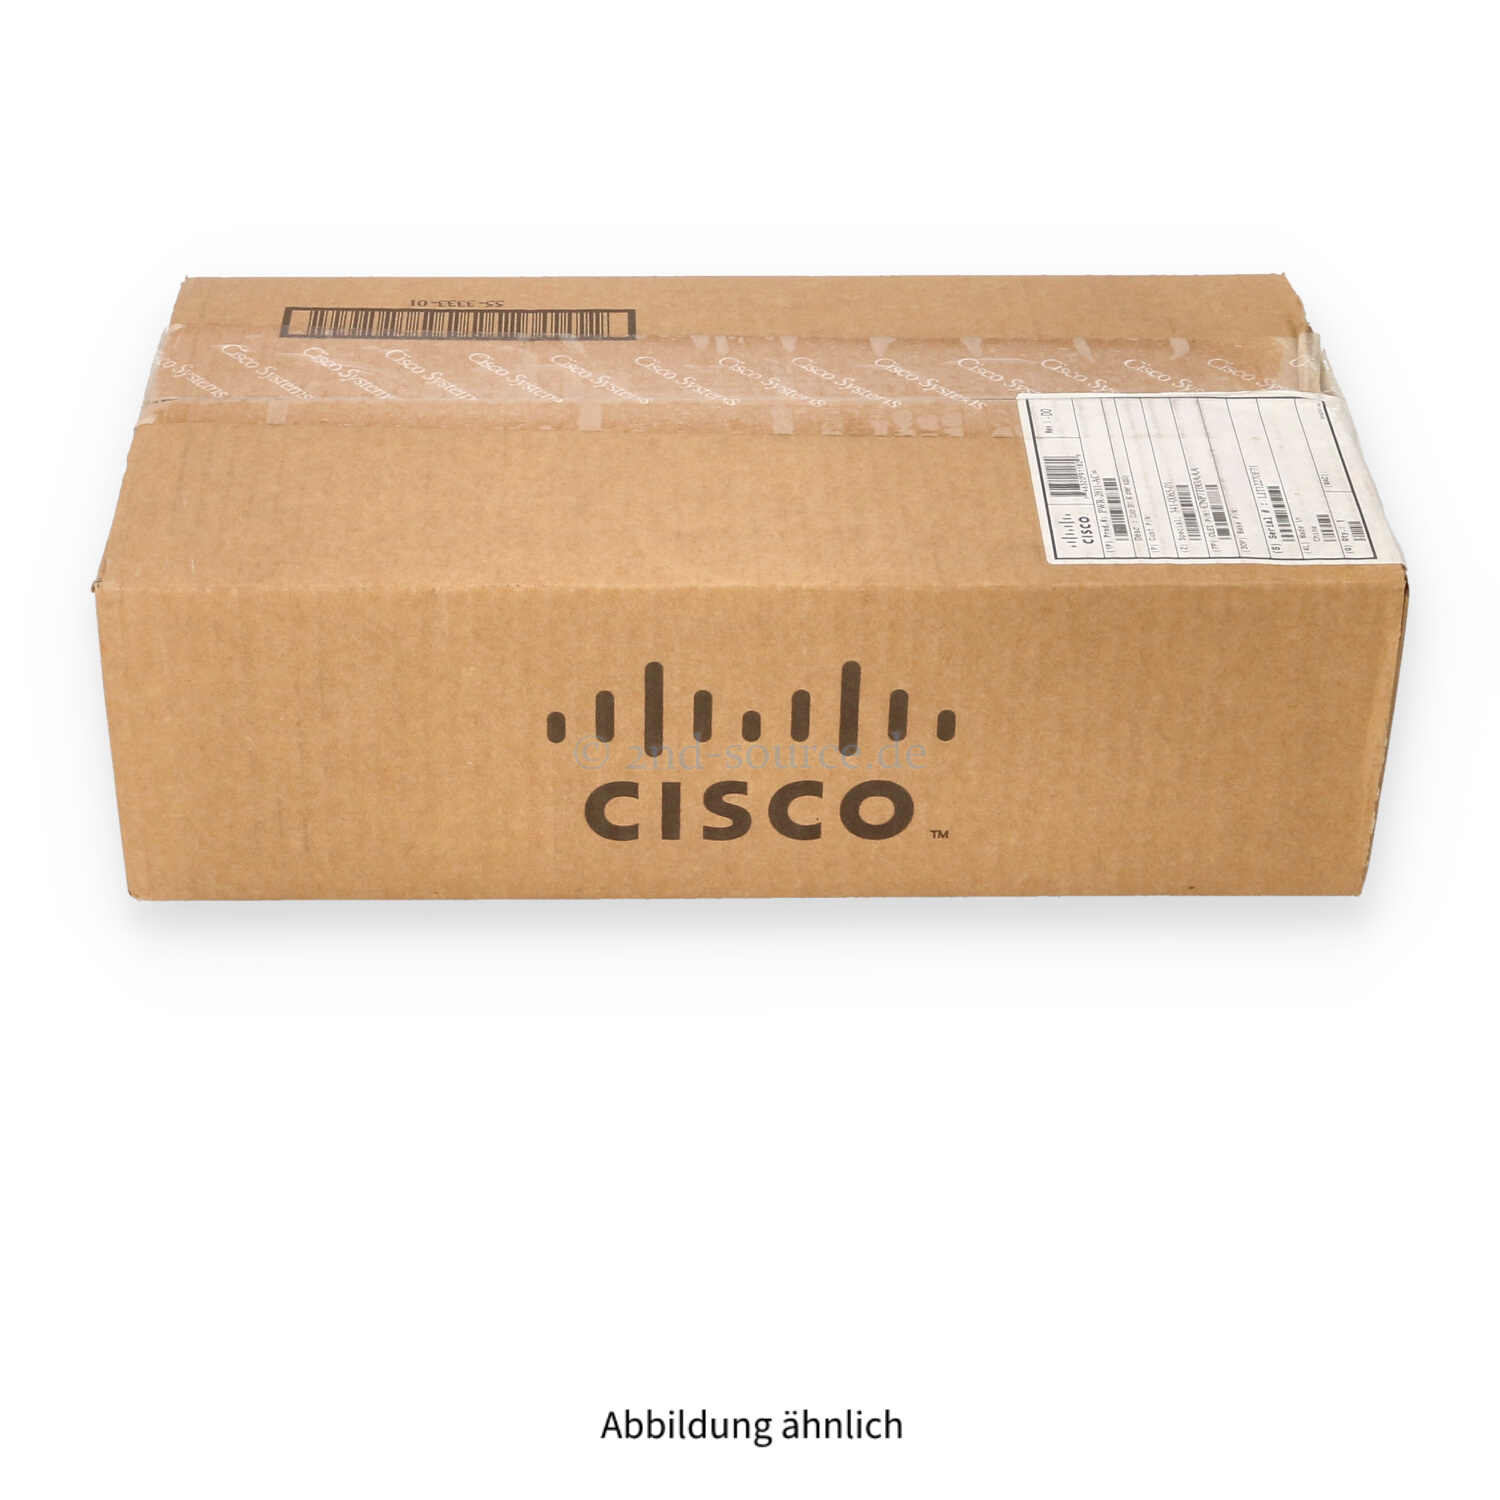 Cisco 125W HotPlug Power Supply Router 2811 PWR-2811-AC 341-0065-01